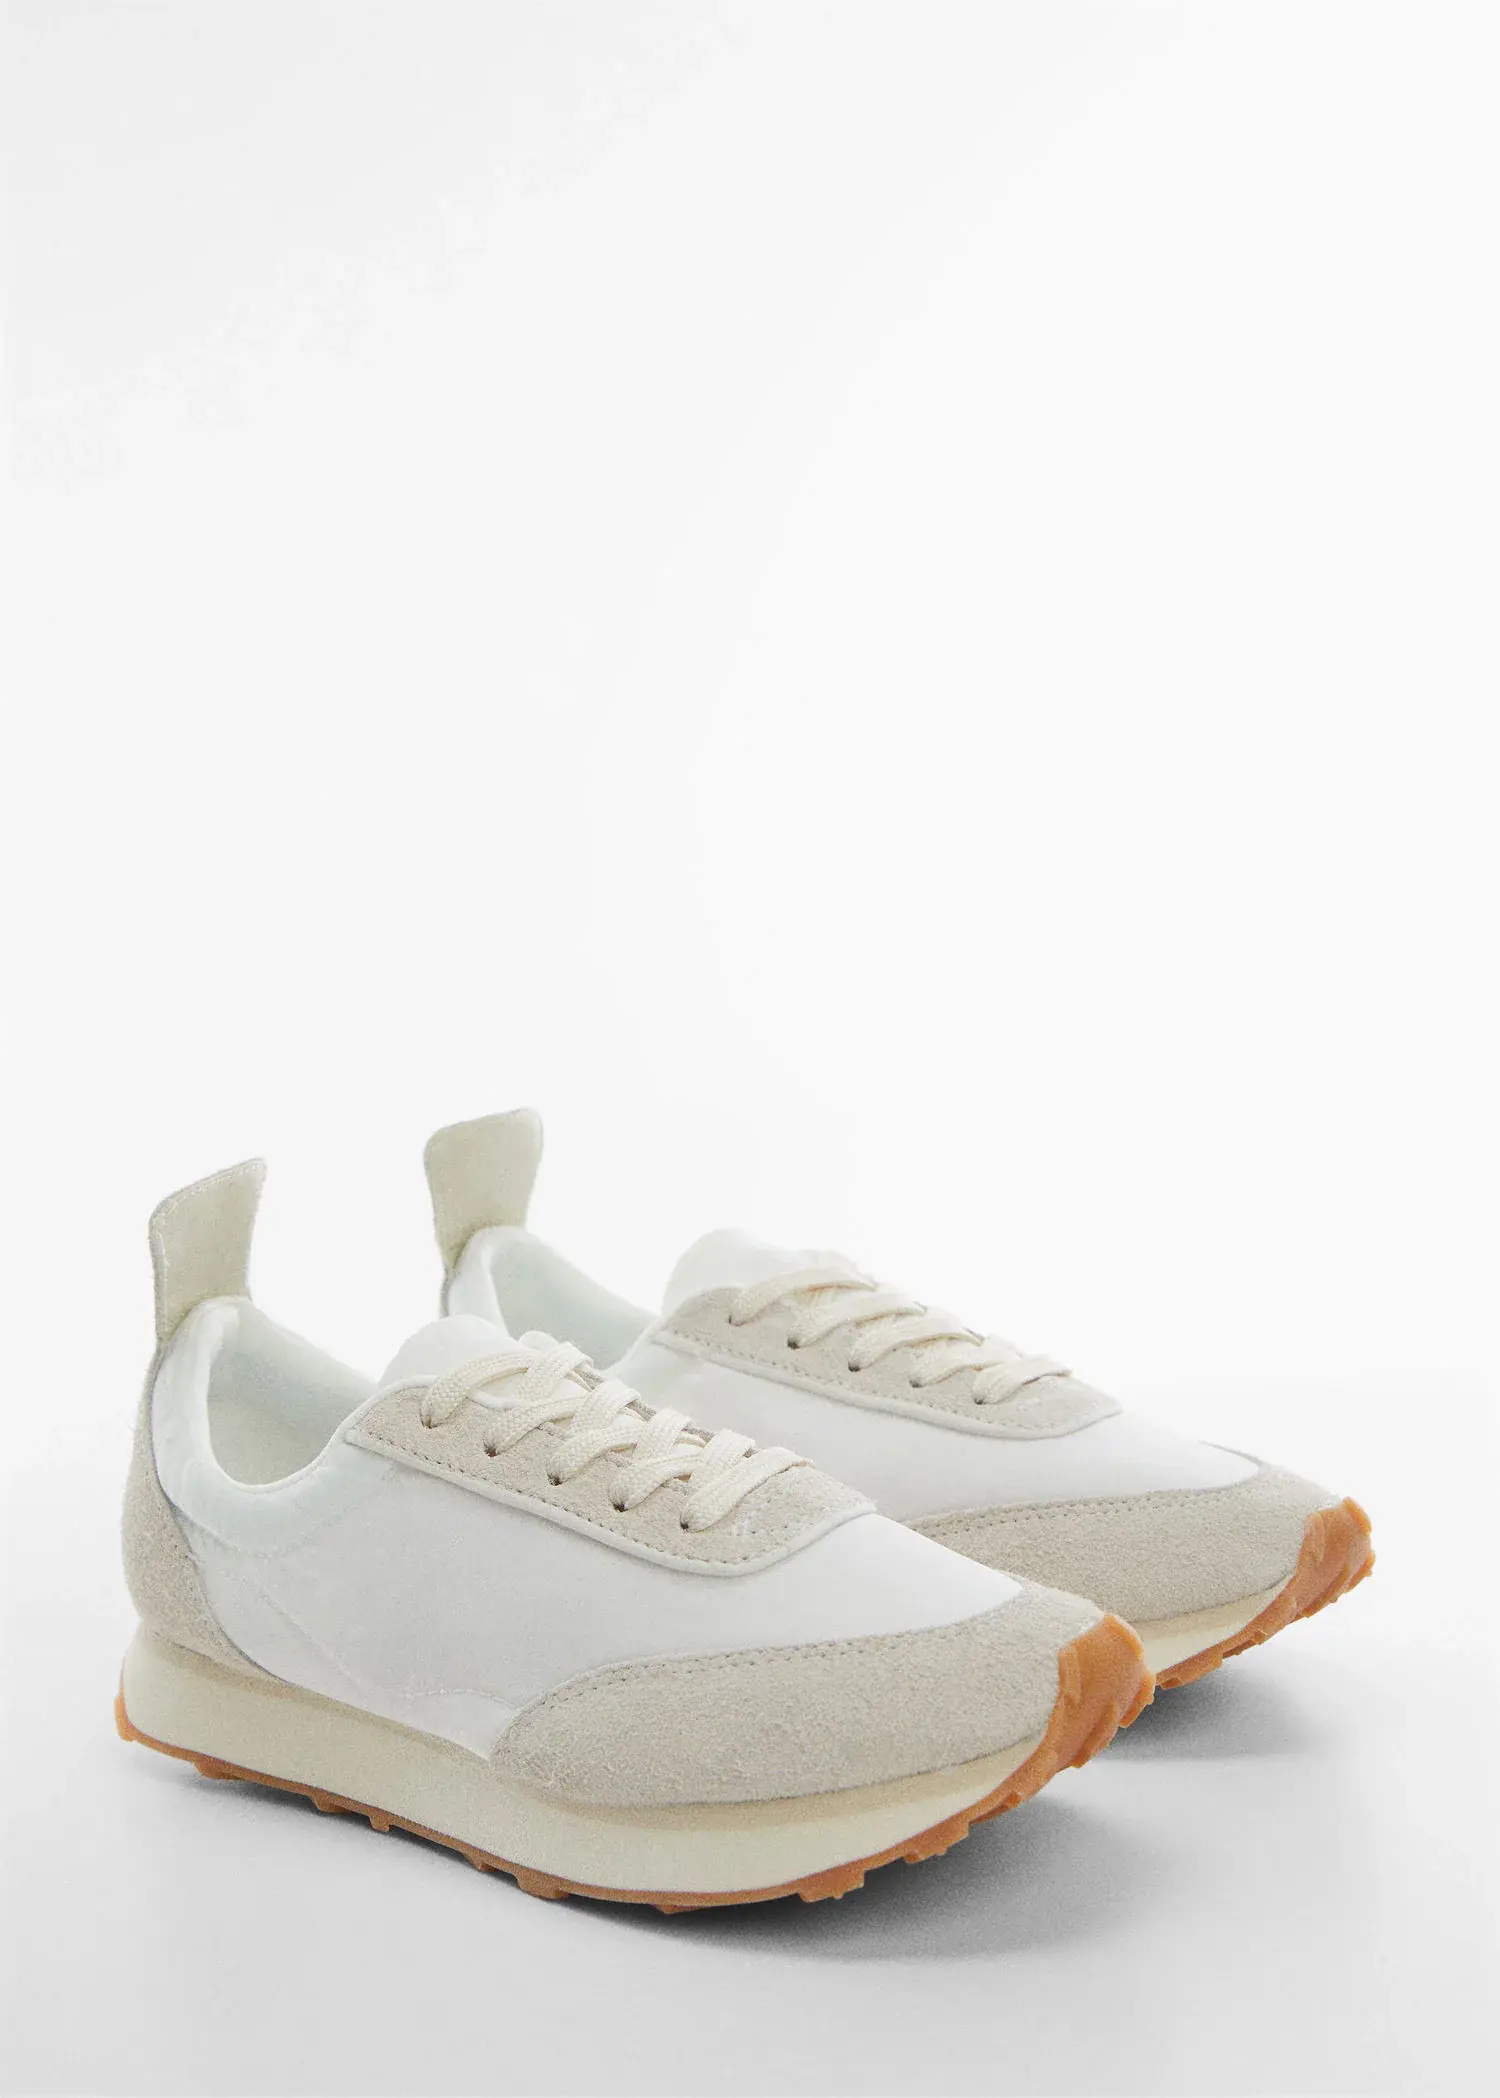 Mango Contrast panel sneakers. a pair of white sneakers on a white surface. 